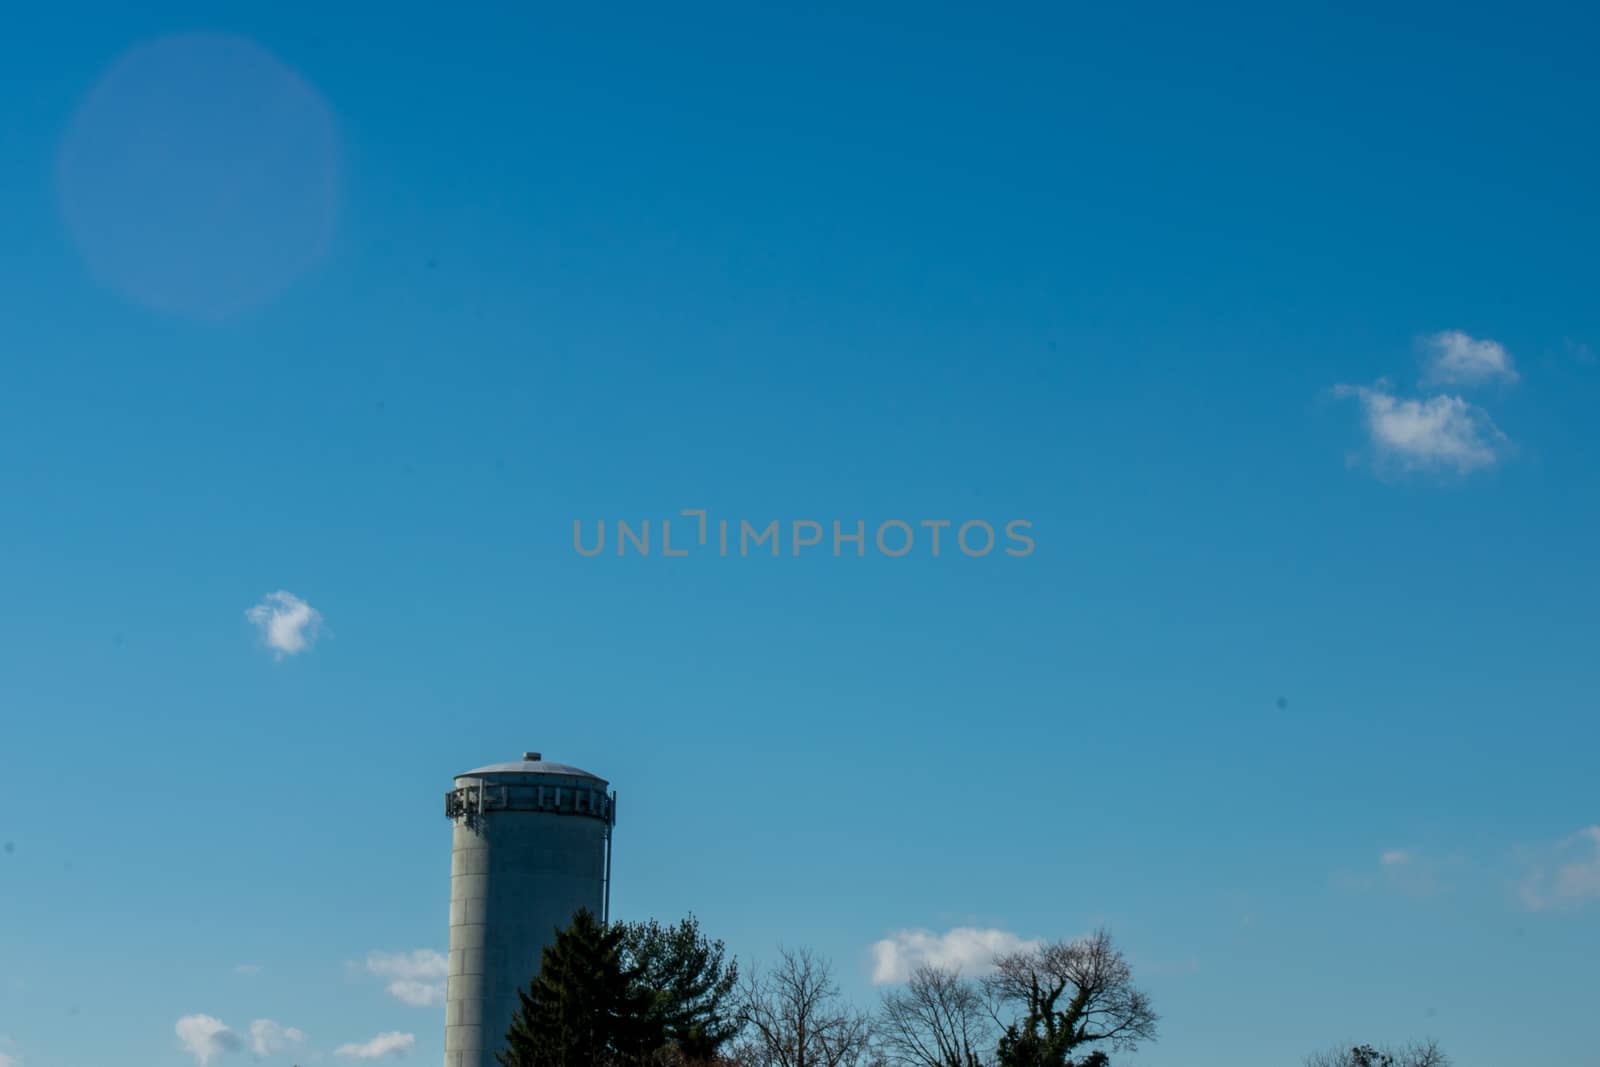 A Large Watertower in the Bottom of the Frame on a Clear Blue Sky